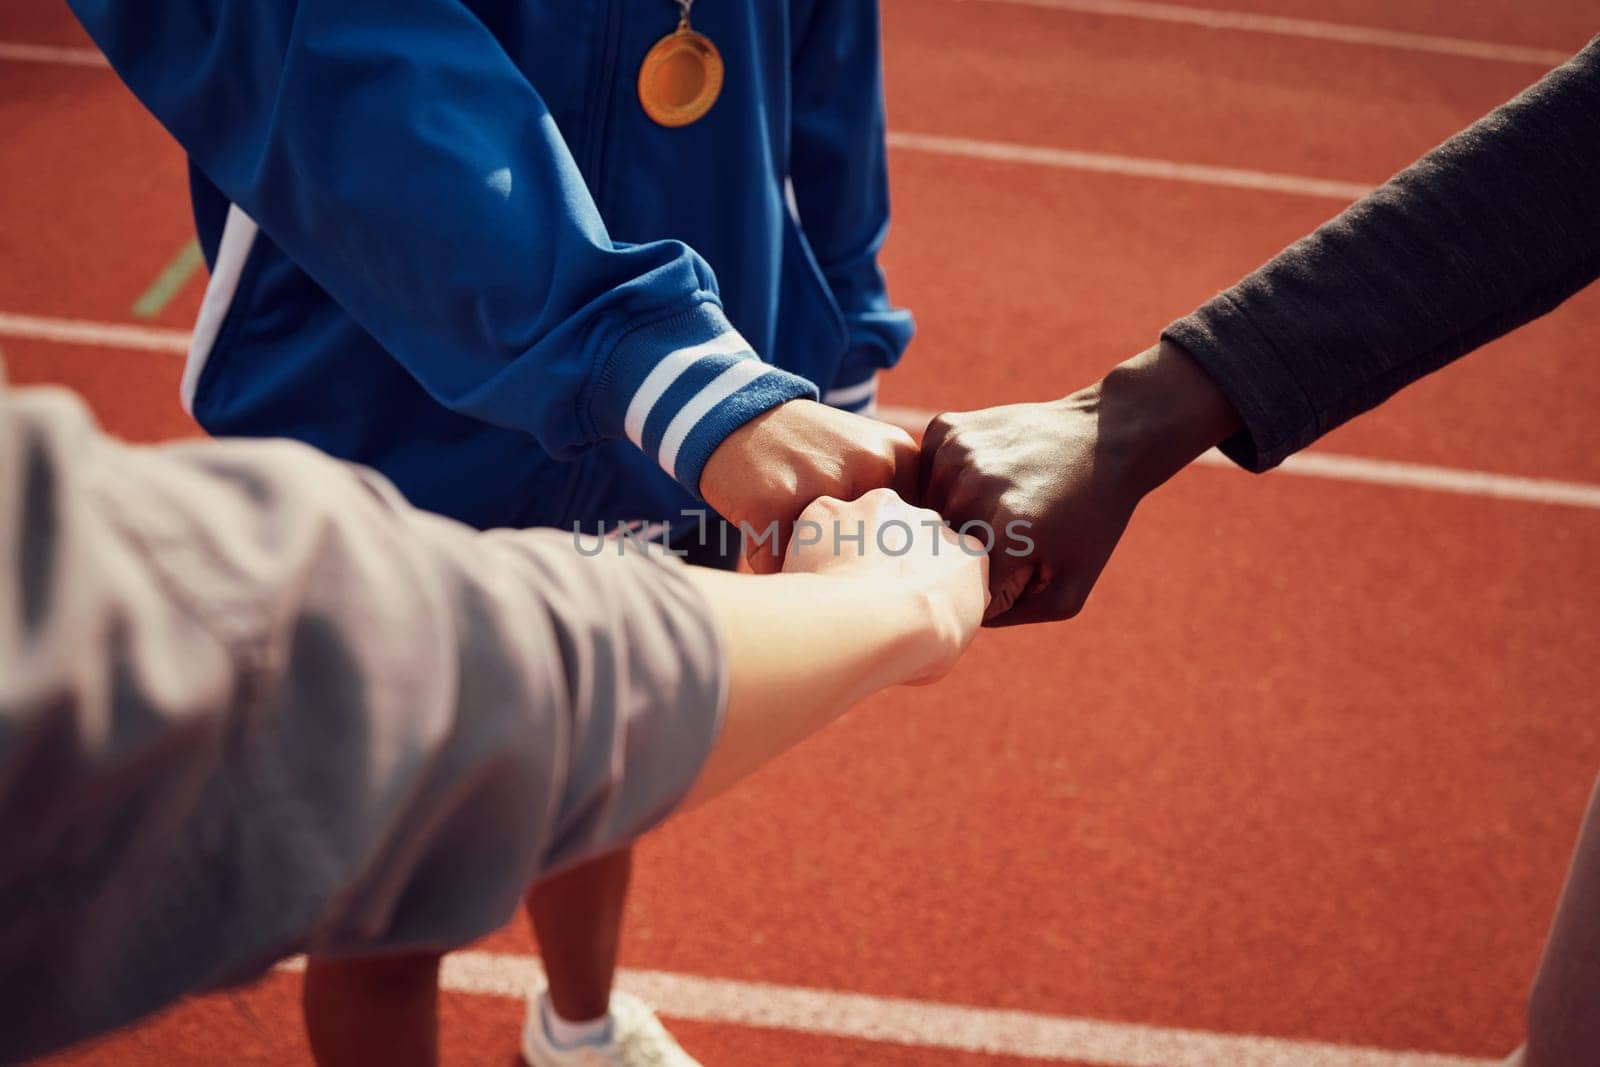 People, diversity and fist bump in fitness for unity, trust or support together on stadium track. Hands of group touching fists in team building for sports motivation, teamwork or goals outdoors.